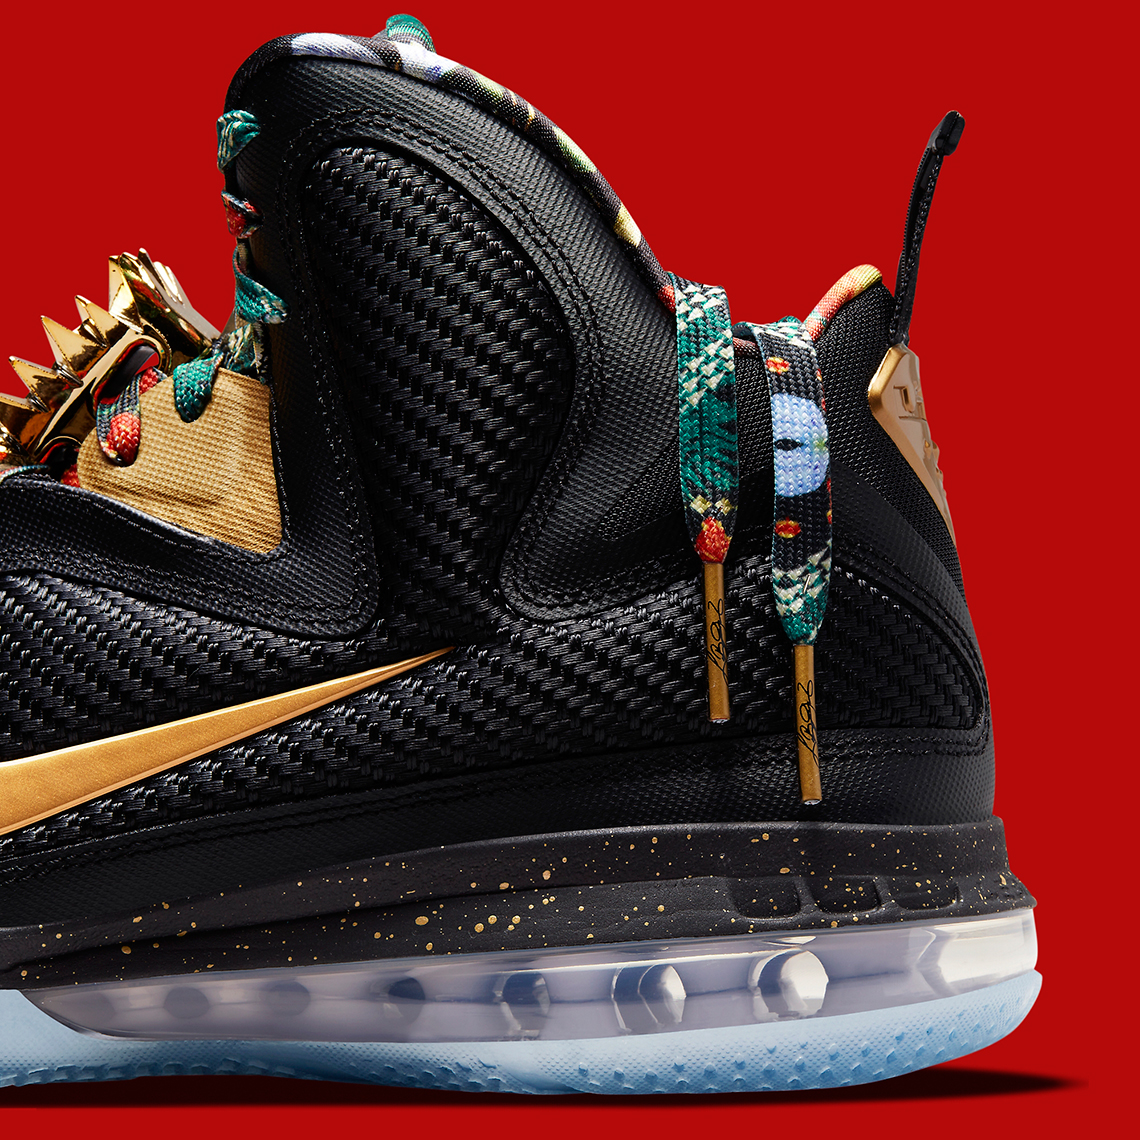 Nike Lebron 9 Watch The Throne Do9353 001 Release Date 11